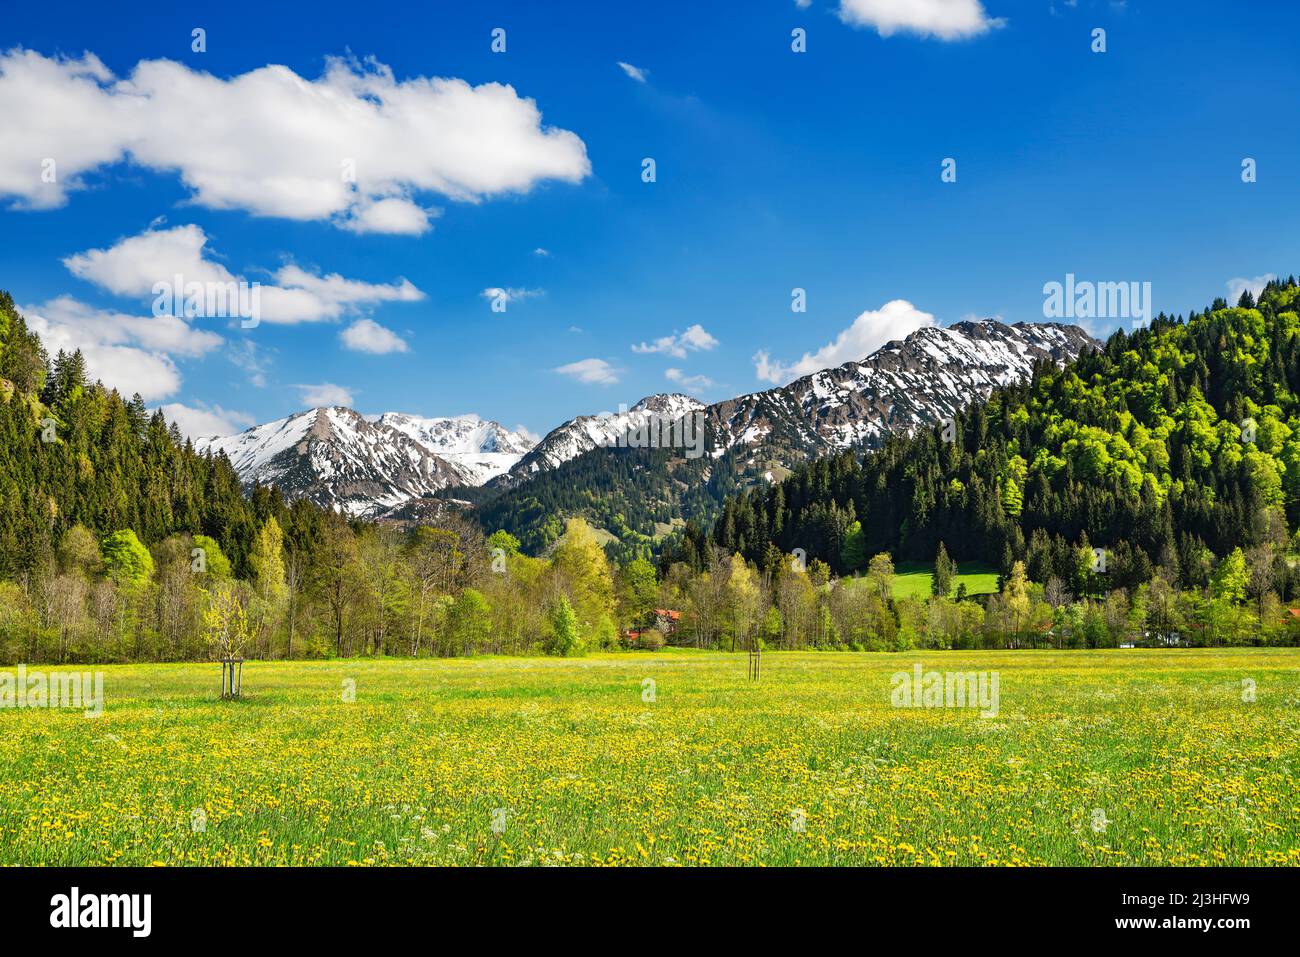 Beautiful mountain landscape in spring. Flowering meadow, forest and snow-covered mountains. Unterjoch, Allgäu Alps, Bavaria, Germany Stock Photo